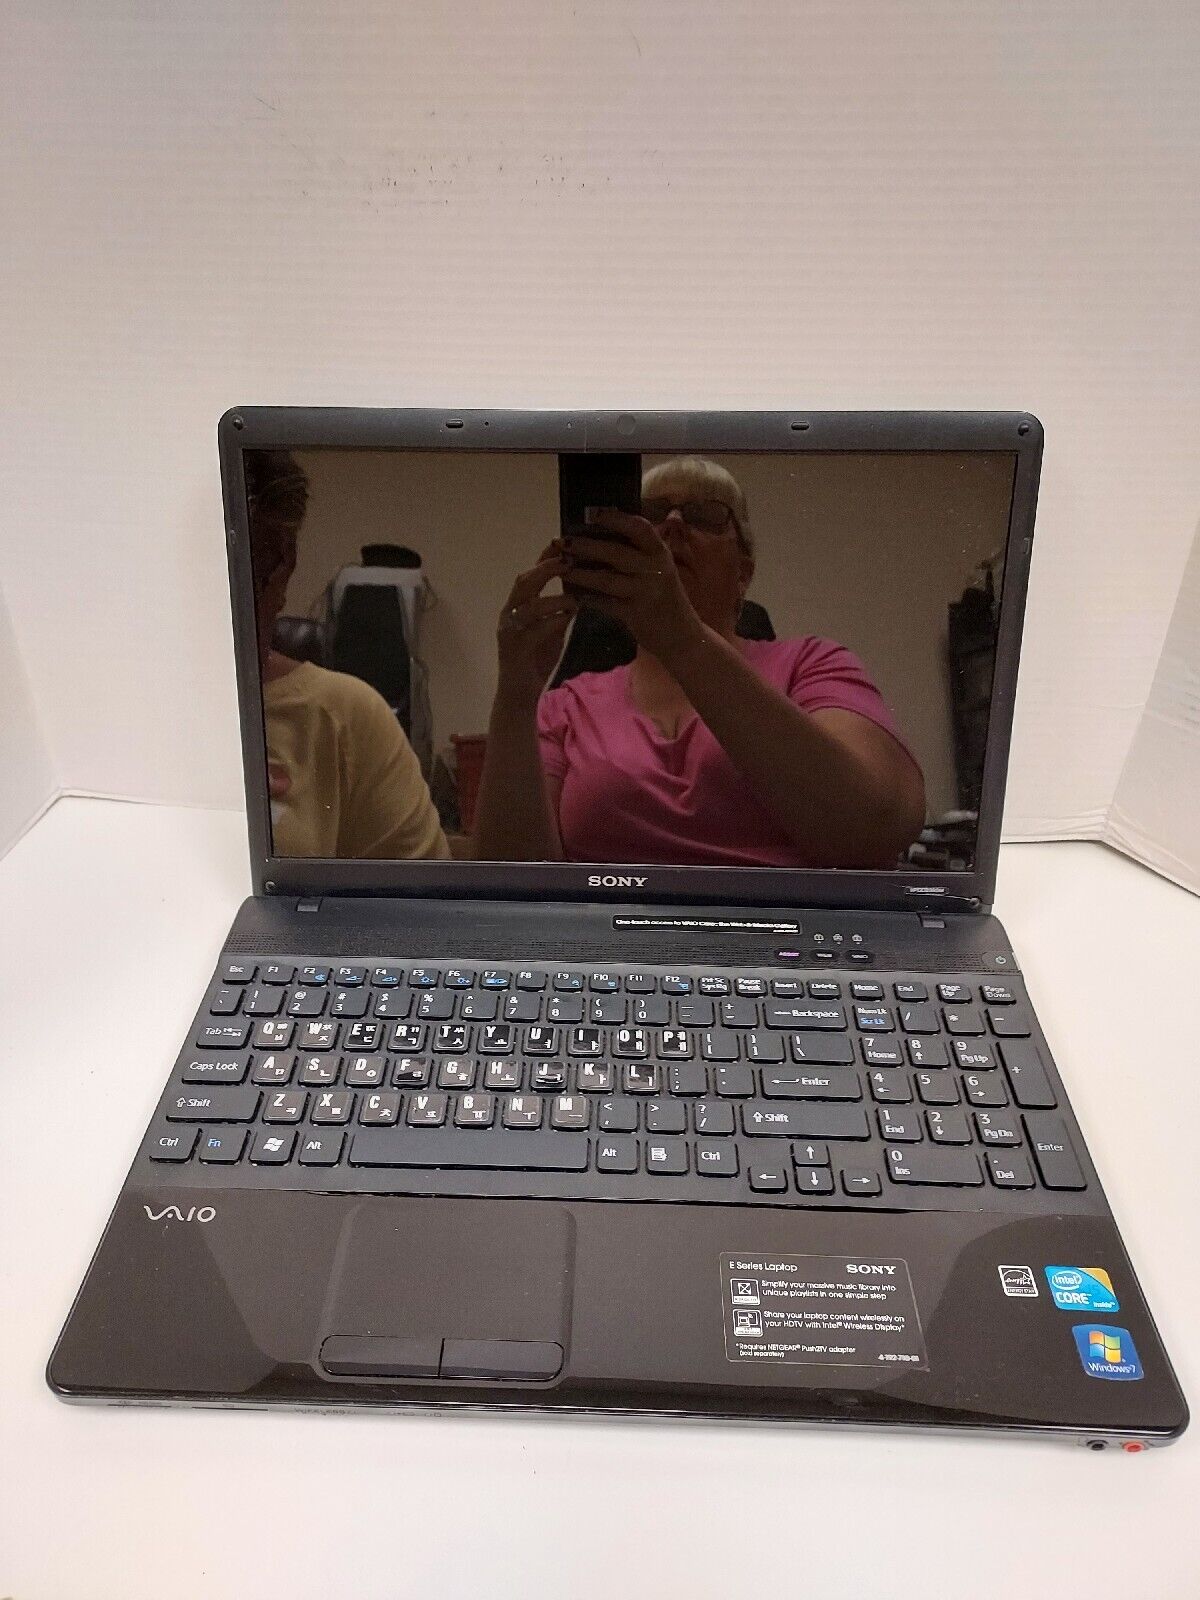 Sony Viao PCG-71318L E Series Laptop i5 1st gen 4gb ram no HDD. Available Now for 29.99